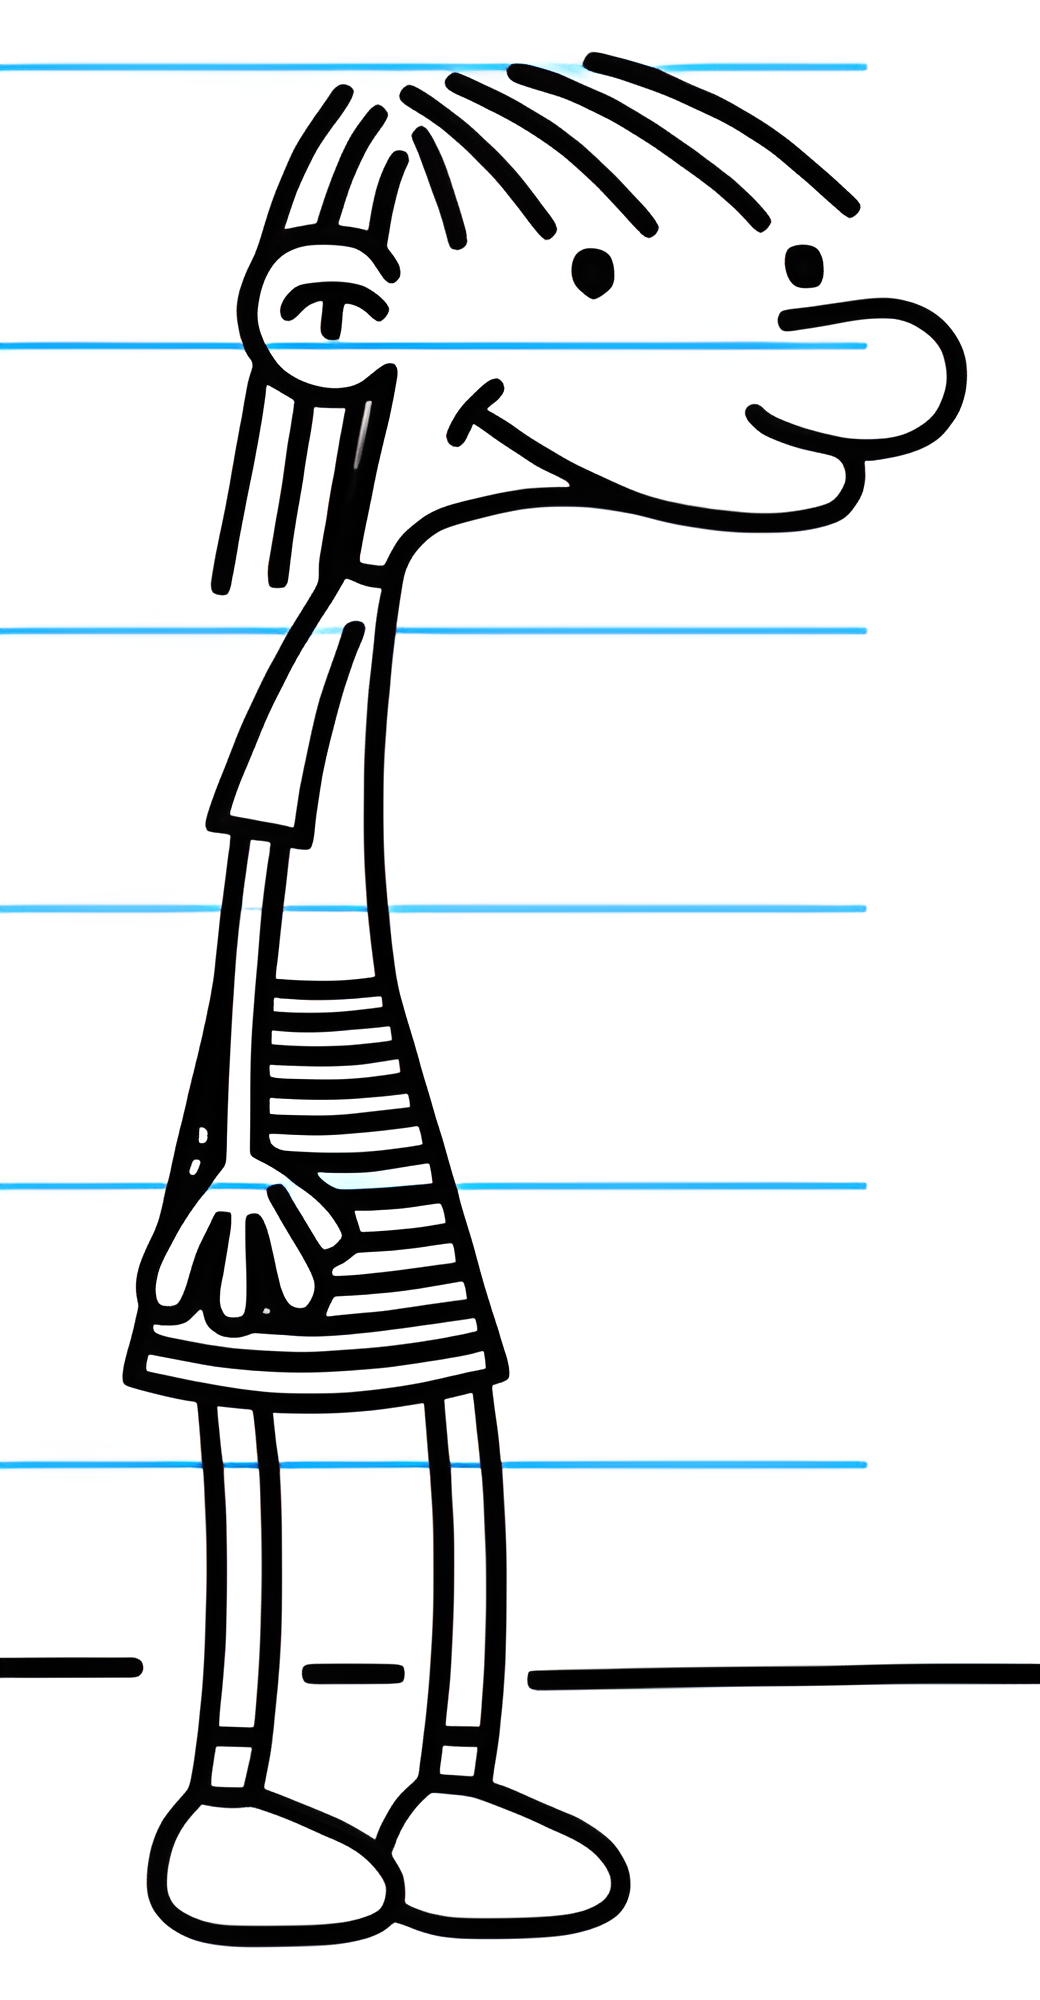 diary of a wimpy kid hard luck rowley and abigail and greg